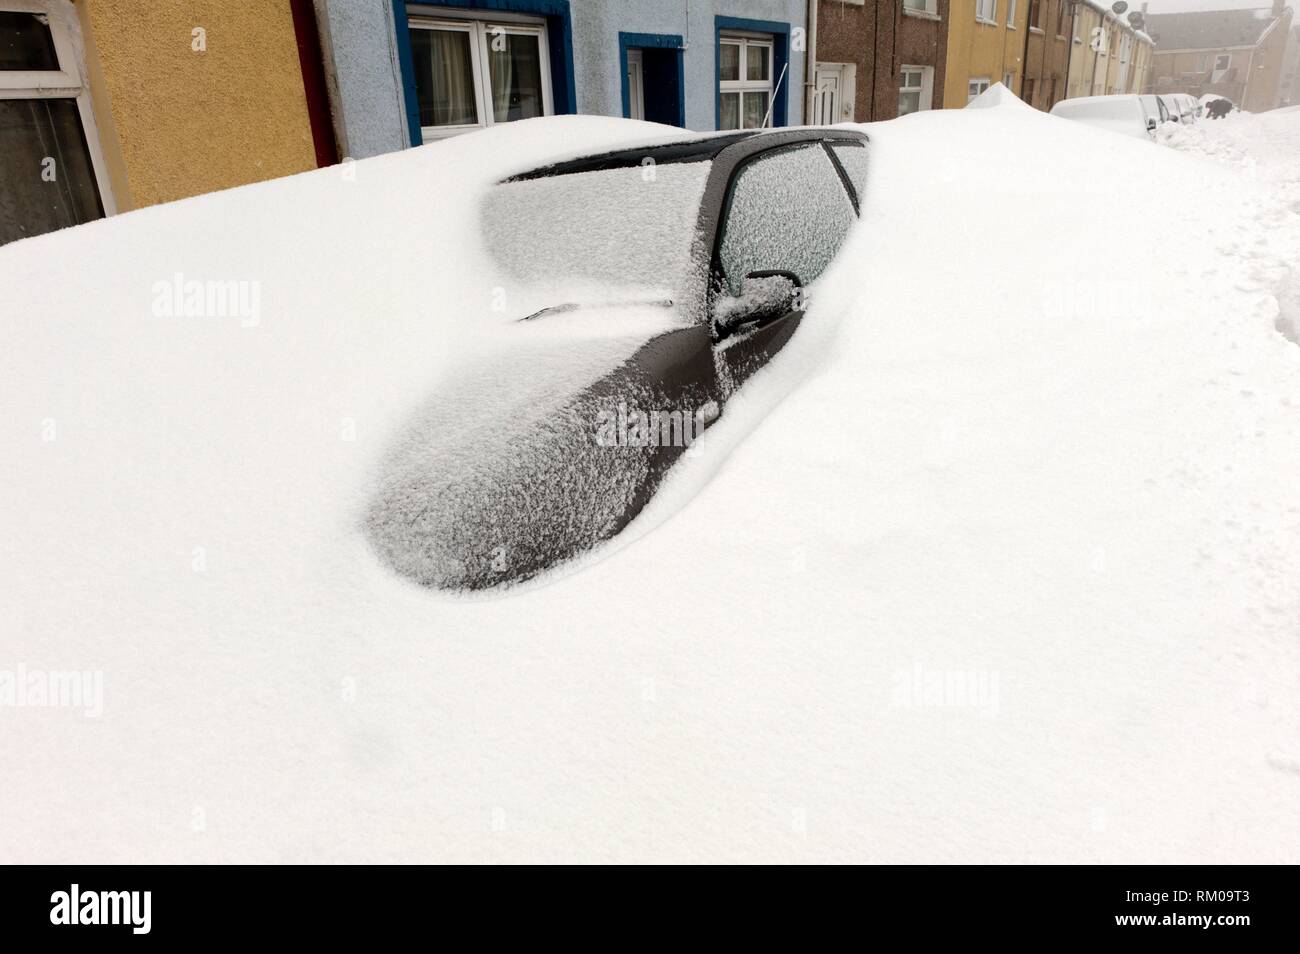 A blizzard hits the town of Brynmawr in Blaenau Gwent, Wales, UK in early March 2018. Stock Photo